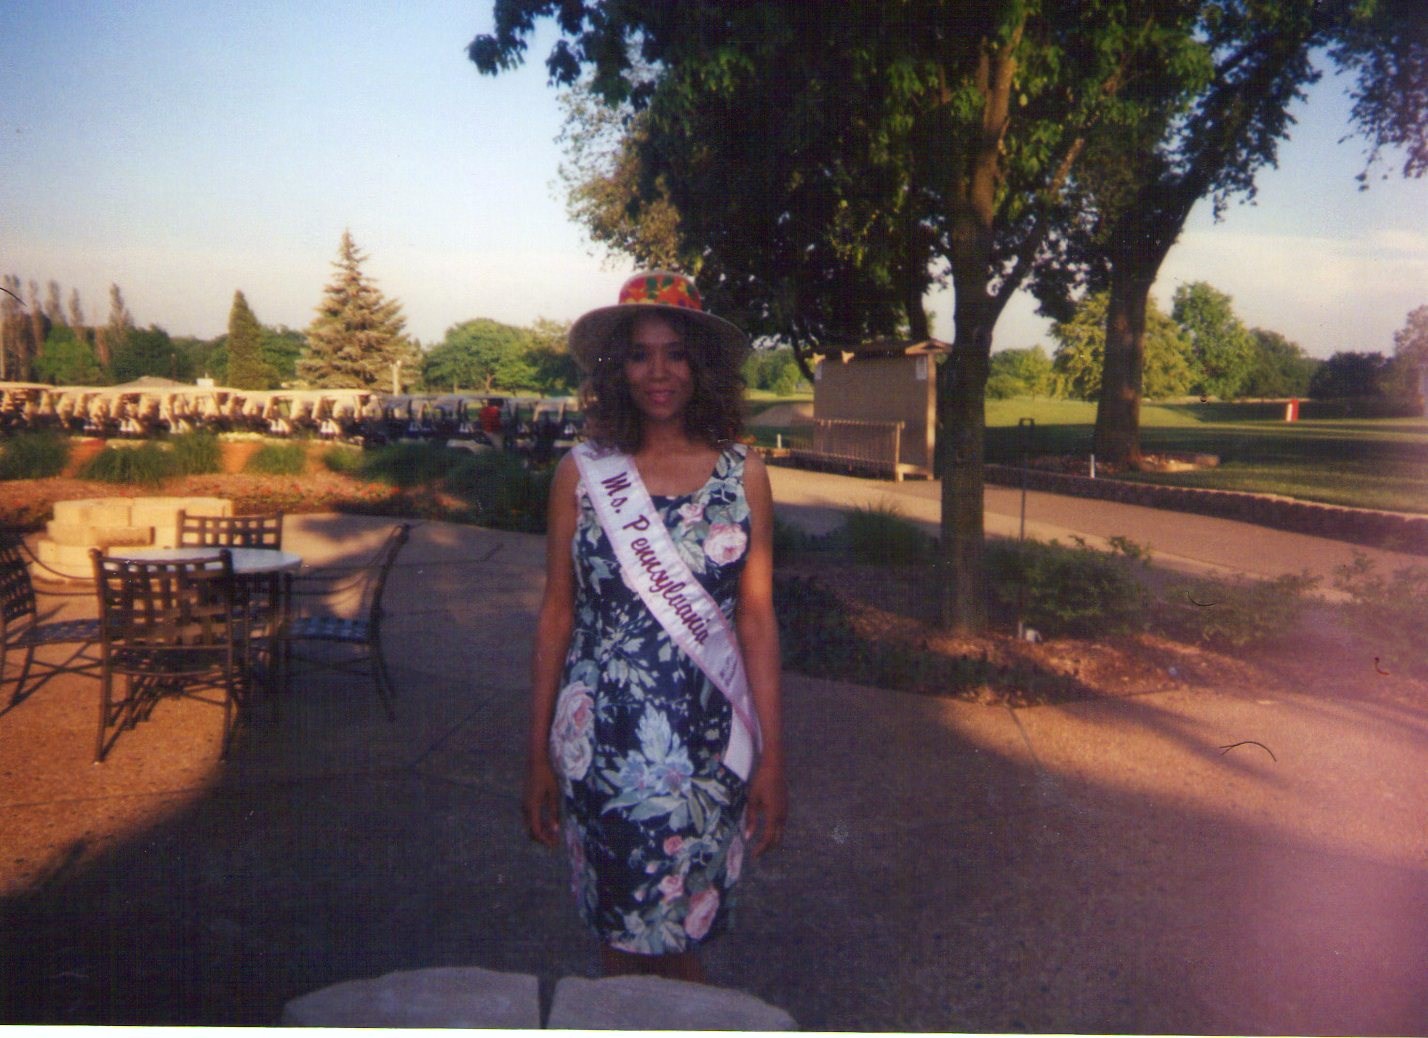 Ms. Pennsylvania 2004 Maria Frisby at the 2004 United States All World Beauties National Pageant in Bloomingdale, Illinois.